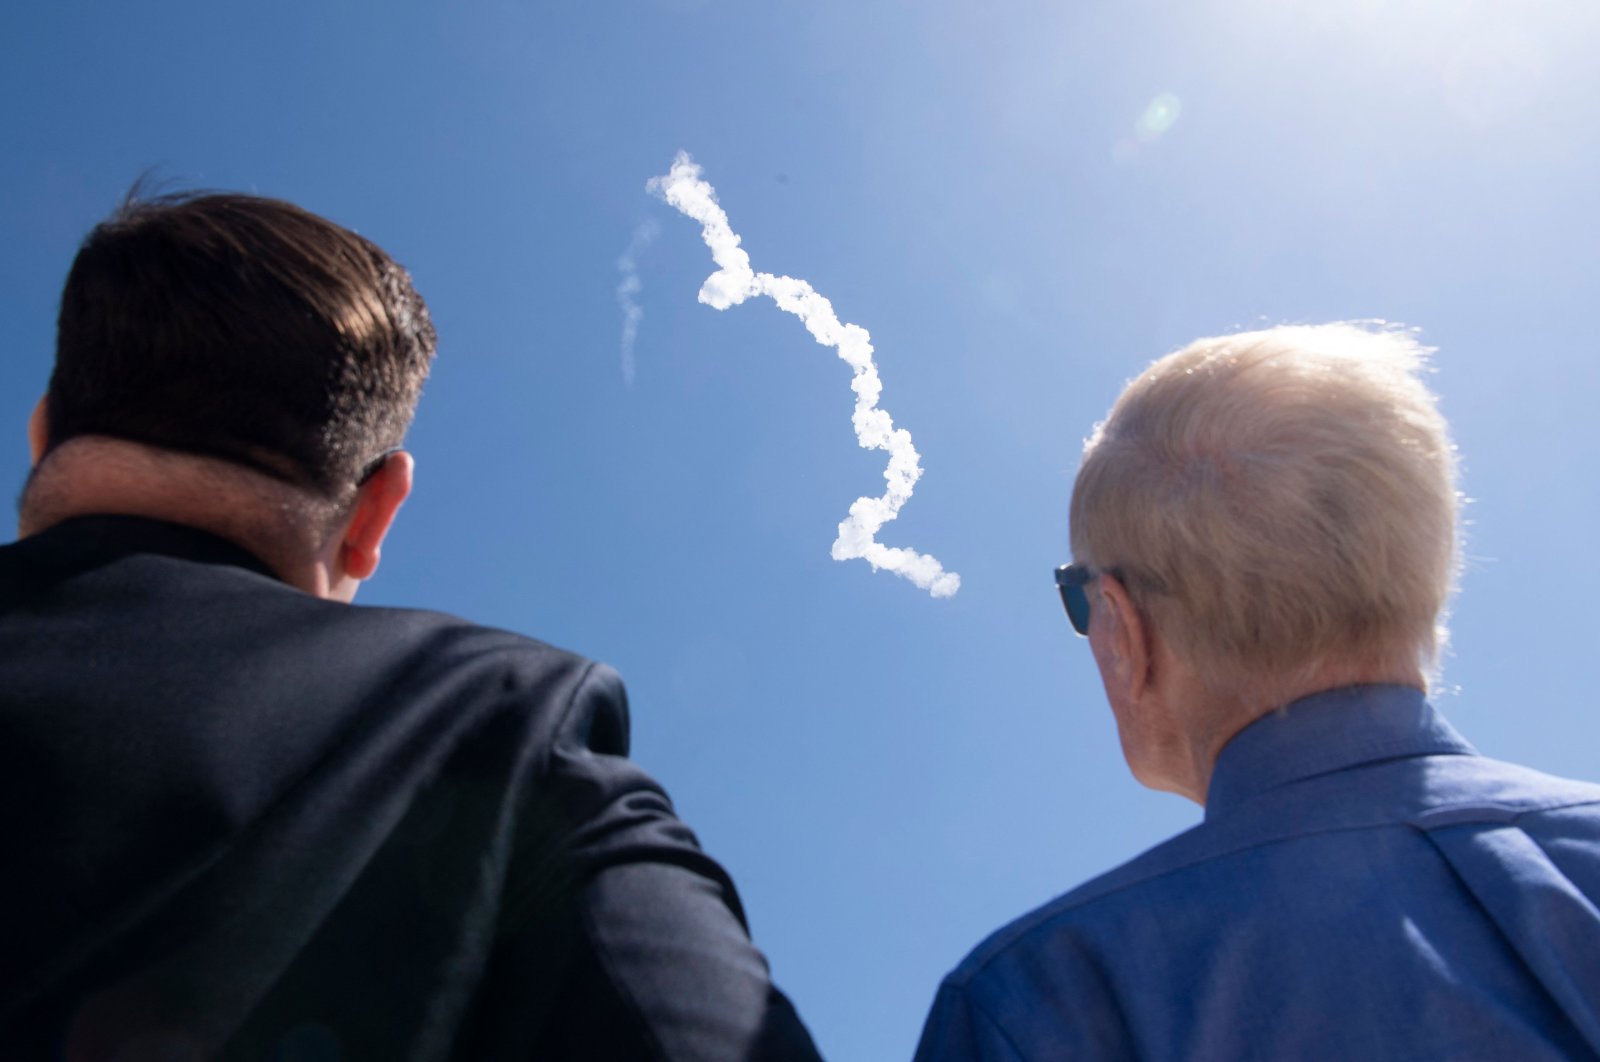 NASA Deputy Chief of Staff Bale Dalton (L) and NASA Administrator Bill Nelson watch the launch of a SpaceX Falcon 9 rocket, from the press site at NASA’s Kennedy Space Center in Florida, U.S., April 8, 2022. (NASA via AFP)